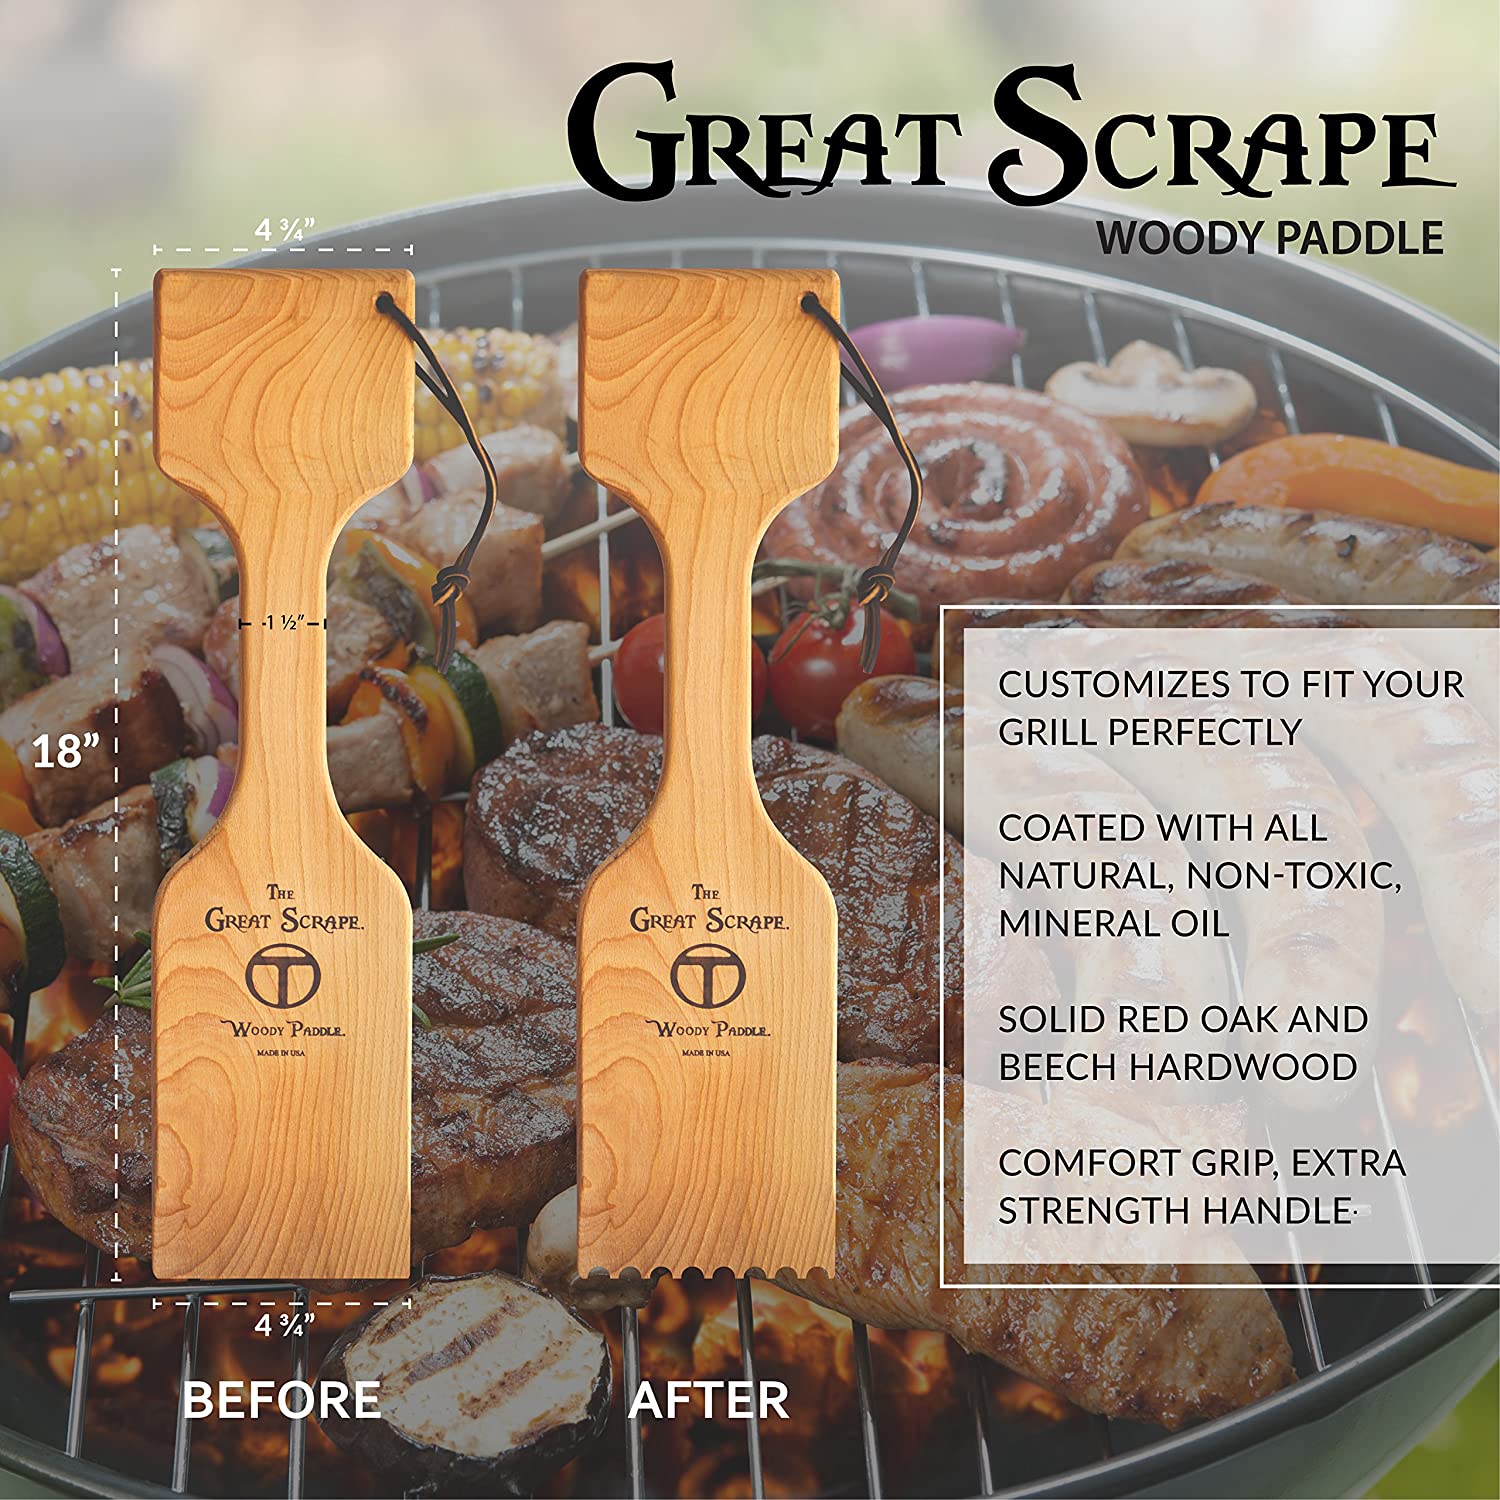 The Great Scrape The Woody Paddle New All Natural BBQ Grill Scraper, 20"